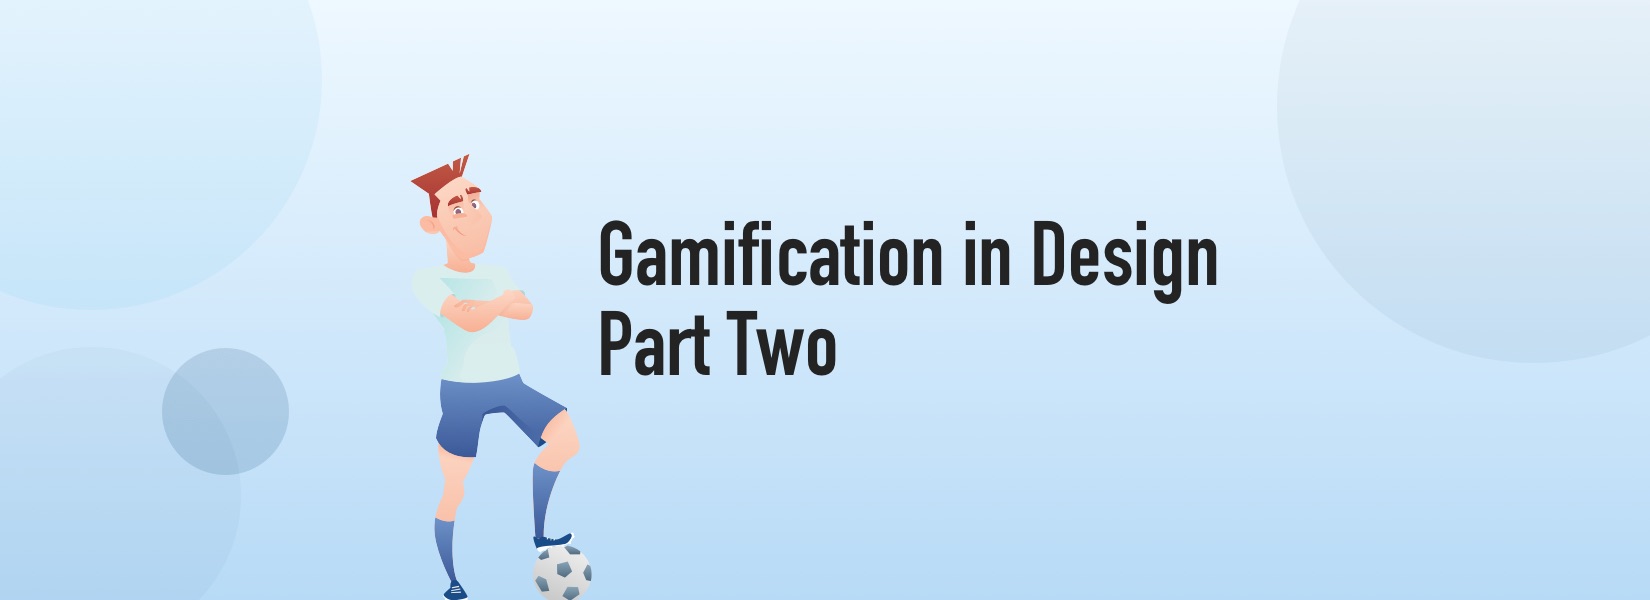 Gamification in Design - Part Two